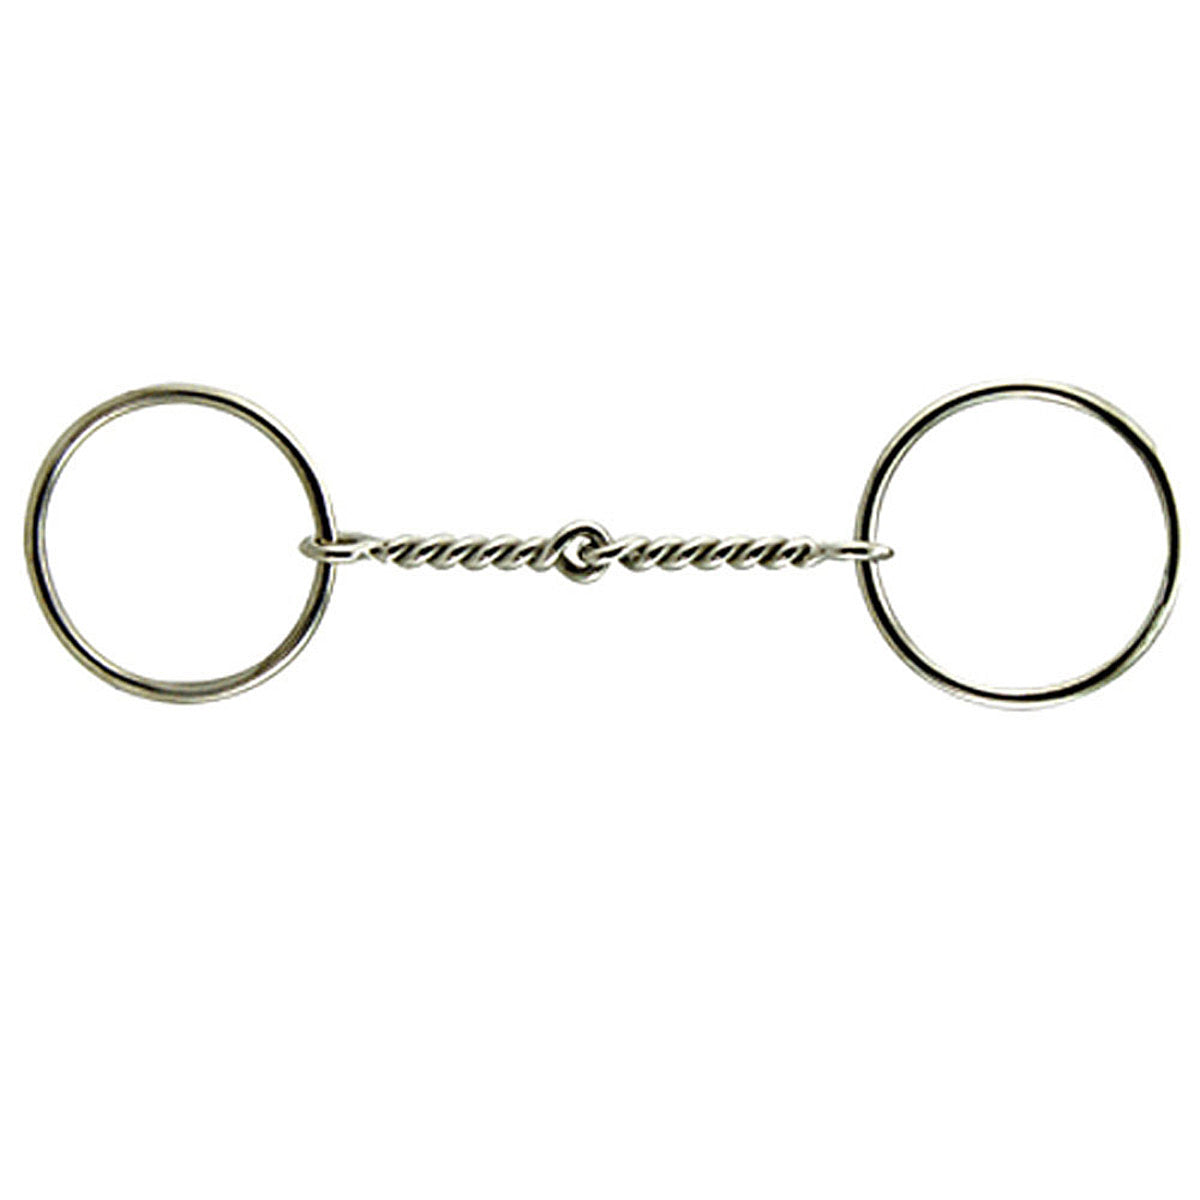 Coronet Single Twisted Wire Loose Ring Snaffle Bit